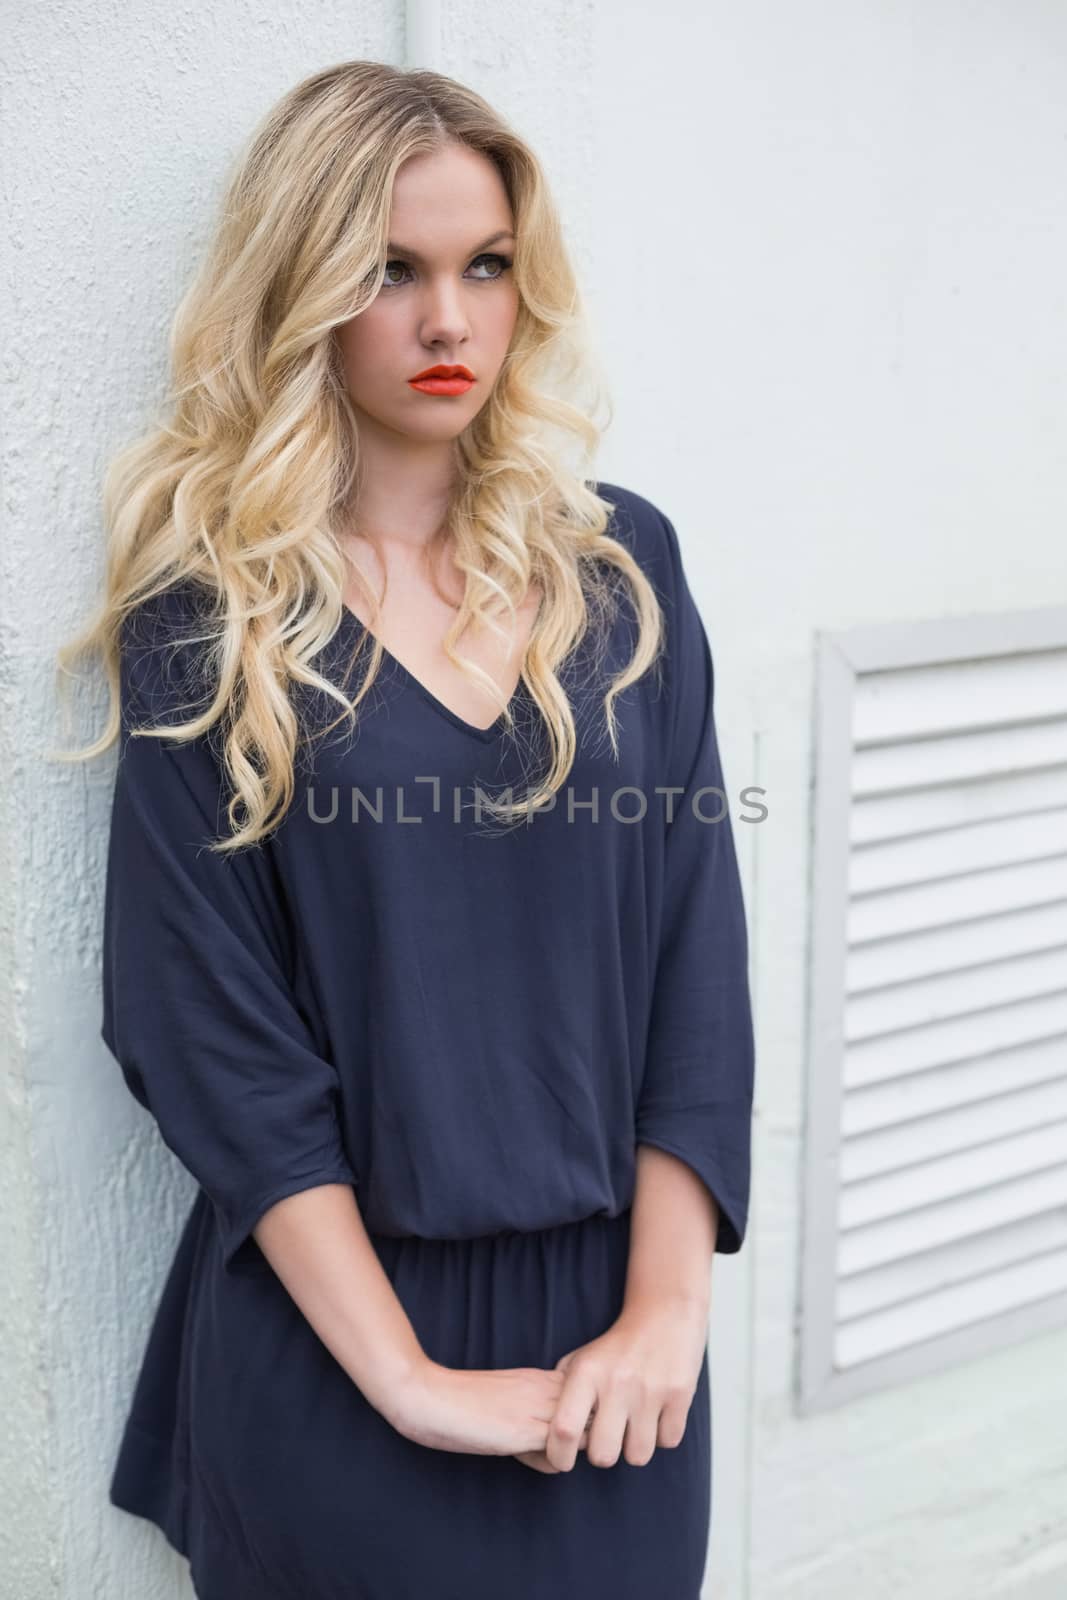 Thoughtful attractive blonde wearing classy dress outdoors against building